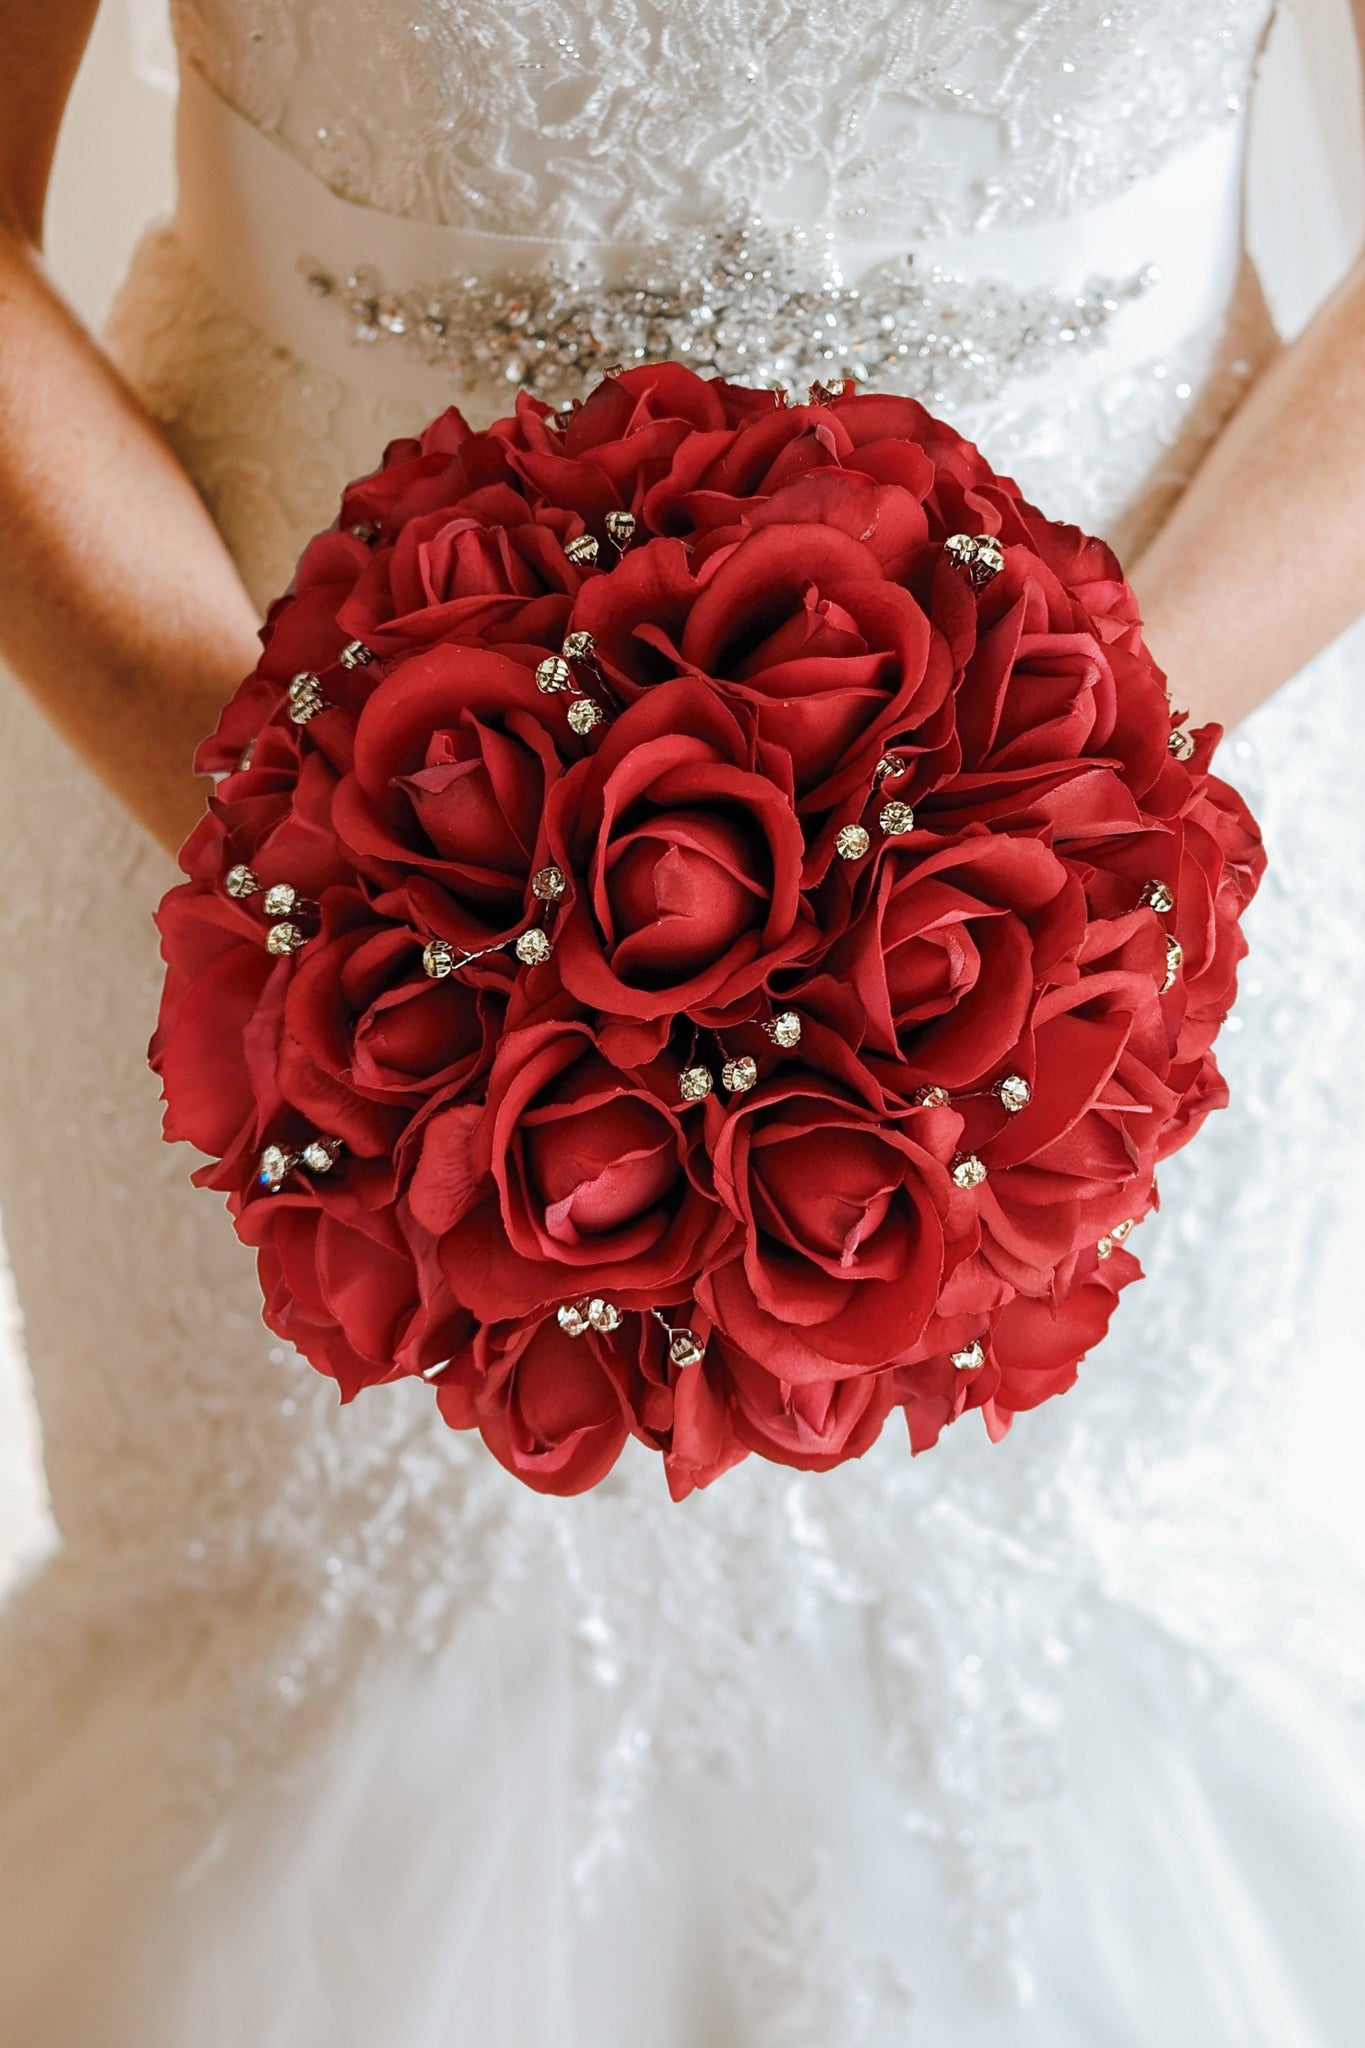 Red Roses & Crystals Bridal or Bridesmaid Bouquet - Add Groom Groomsman Boutonniere or Arch Flowers or Corsage